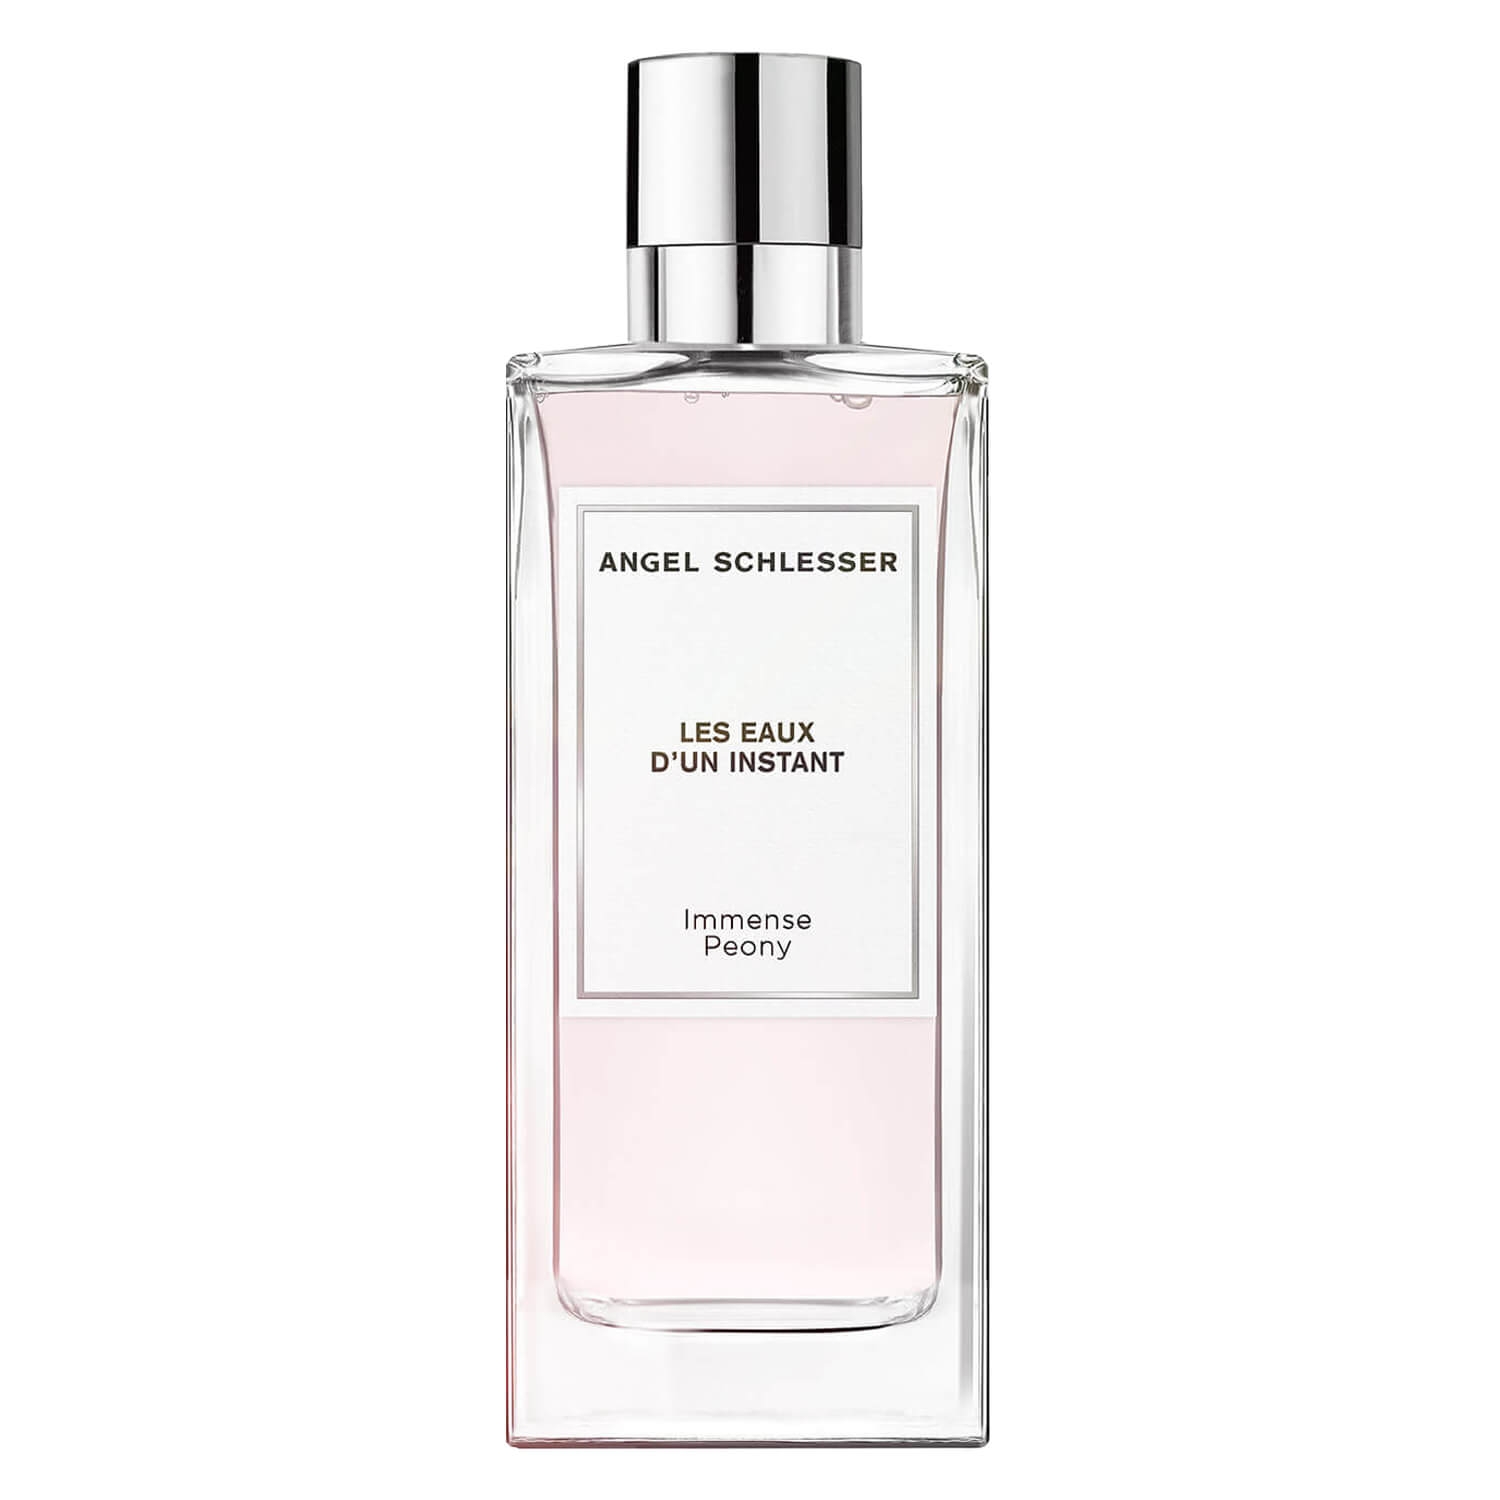 Product image from ANGEL SCHLESSER - Les Eaux d'un Instant Immense Peony